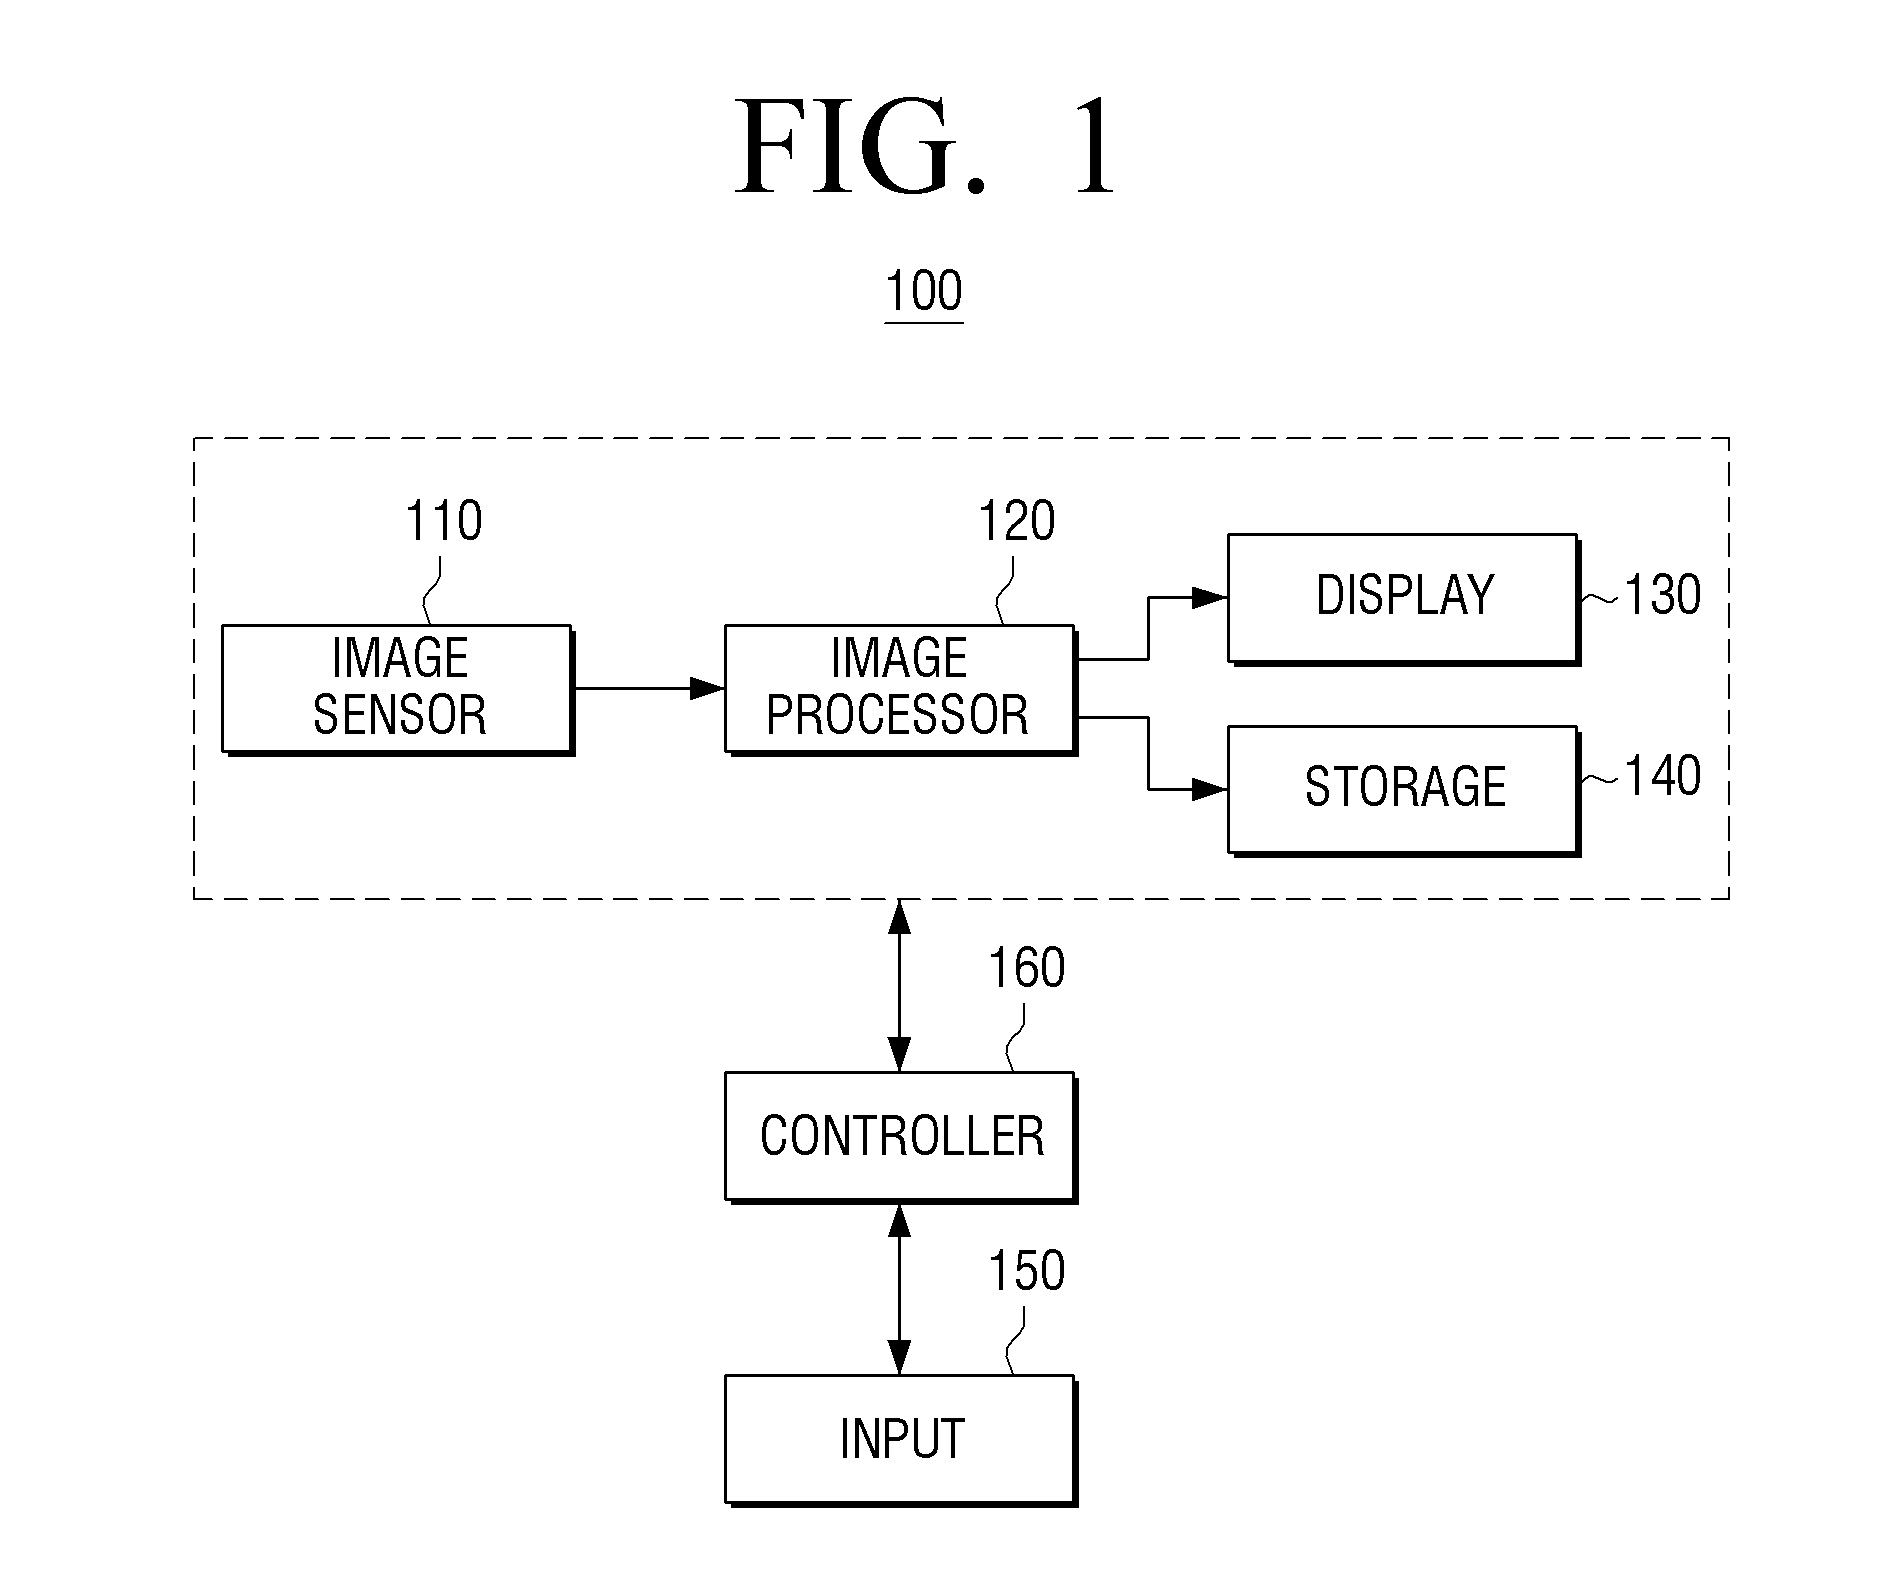 Apparatus and method to photograph an image